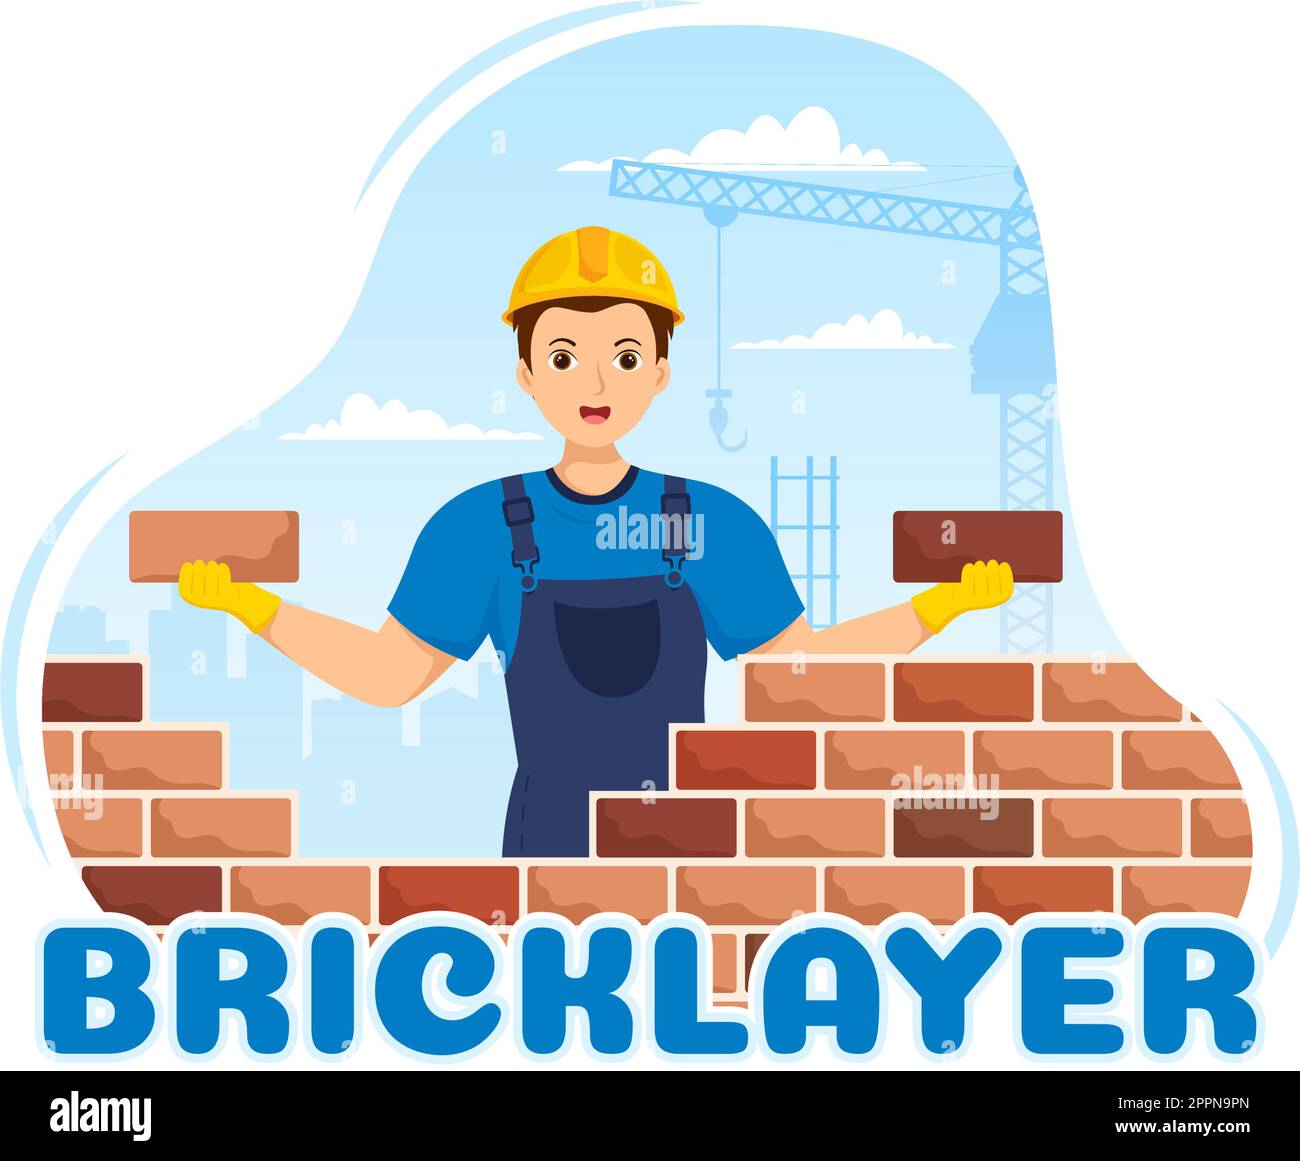 Bricklayer Worker Illustration with People Construction and Laying Bricks for Building a Wall in Flat Cartoon Hand Drawn Landing Page Templates Stock Vector